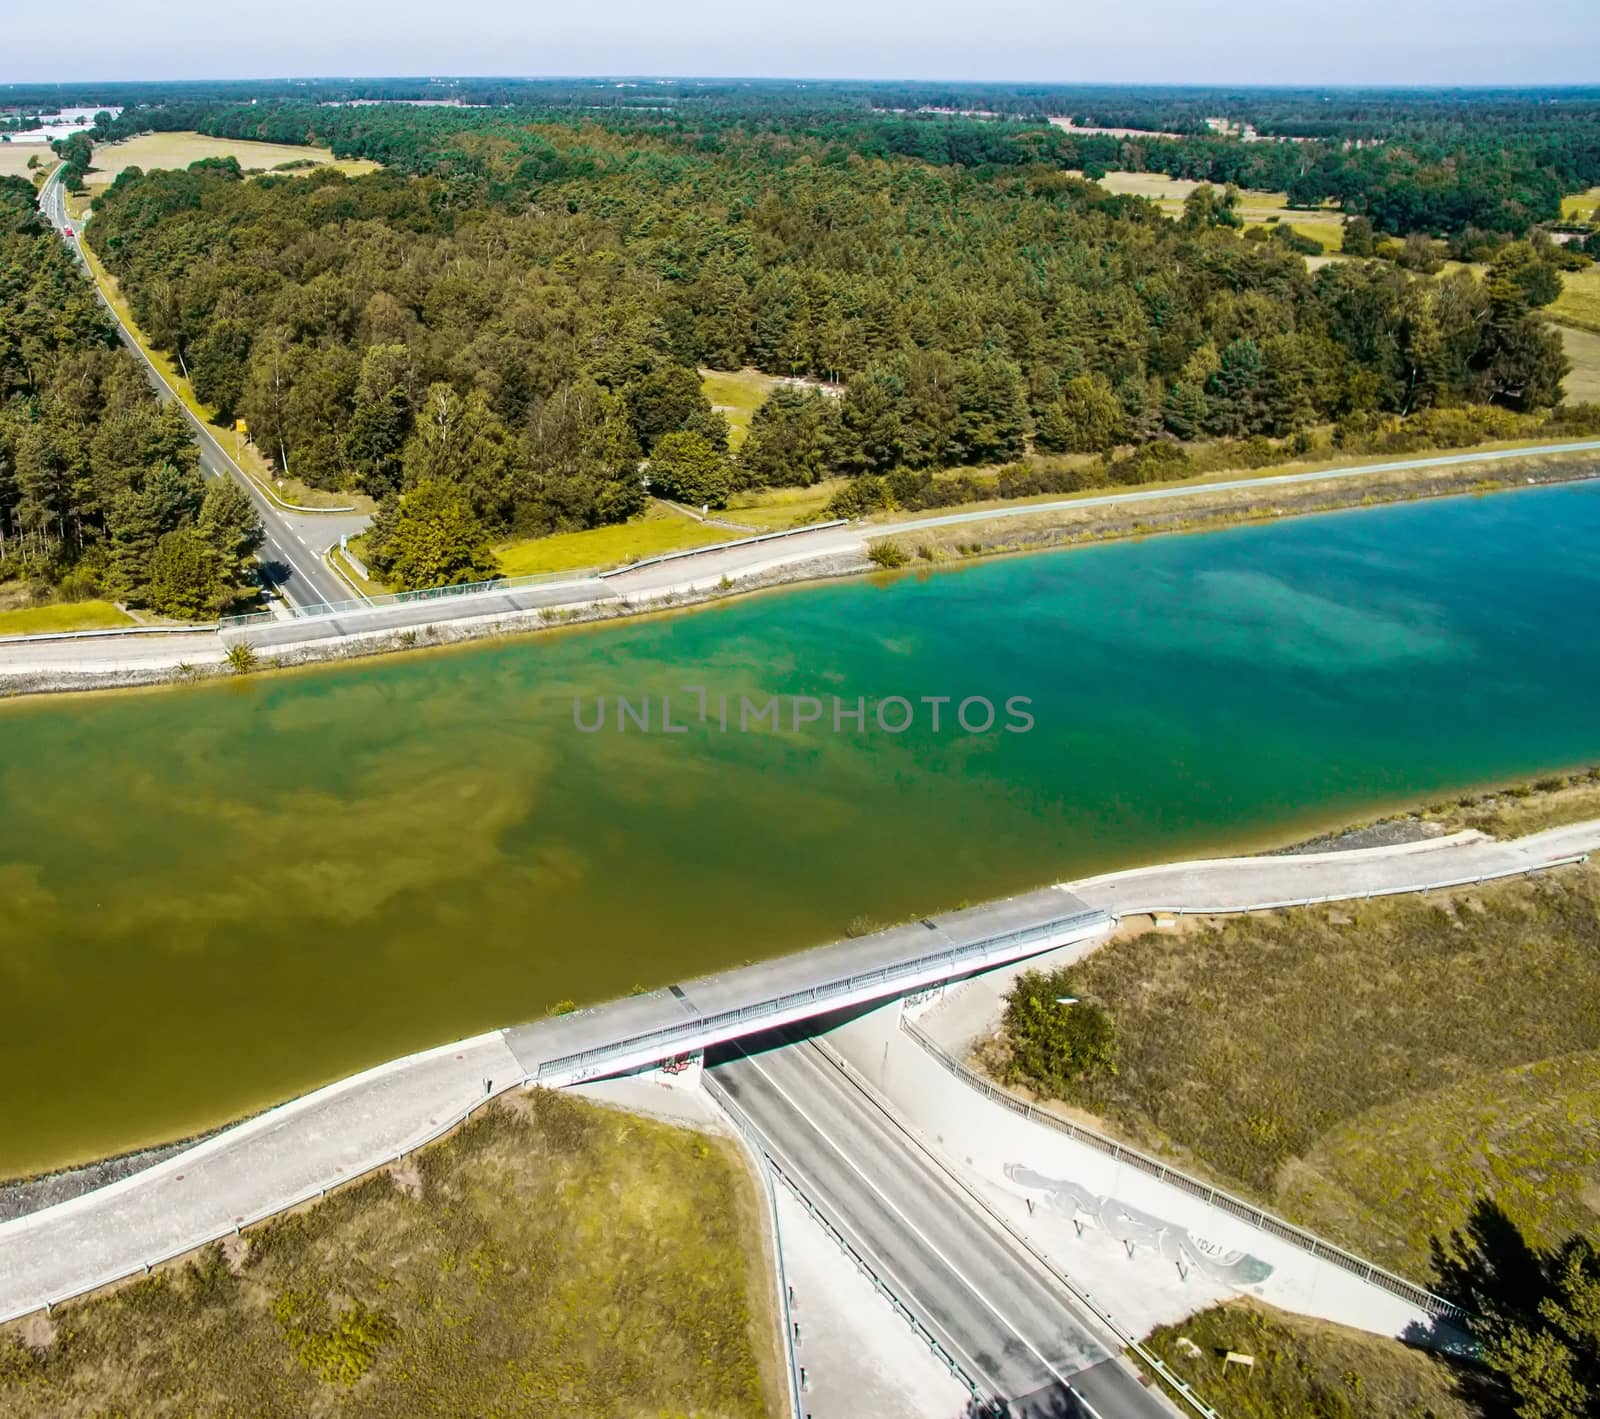 Aerial photograph, road under a canal near Gifhorn, Germany, drone flight at about 60 meters above ground level.